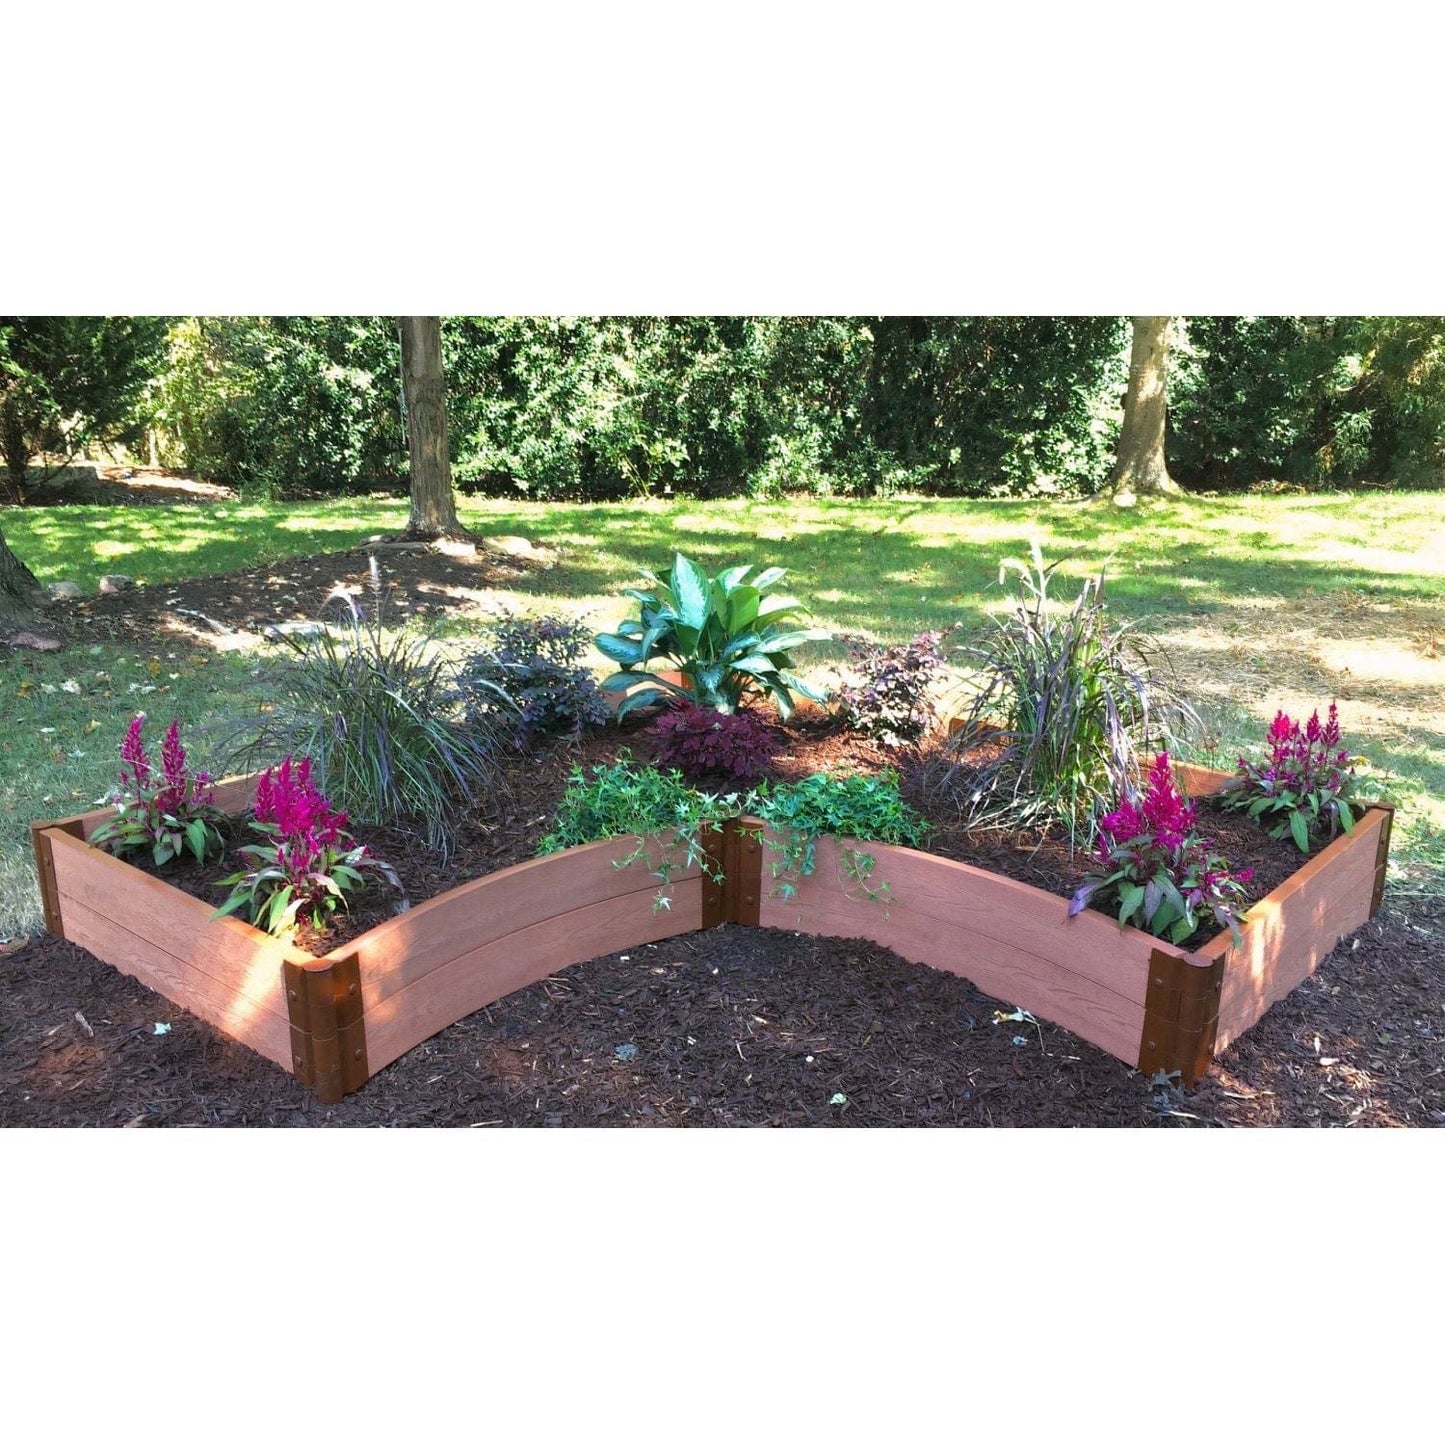 Frame It All Gardening Accessories Frame It All | Tool-Free Grand Concourse Interior Curved Corner Raised Garden Bed 8' X 8' X 11" - Uptown Brown - 1" Profile 800002028